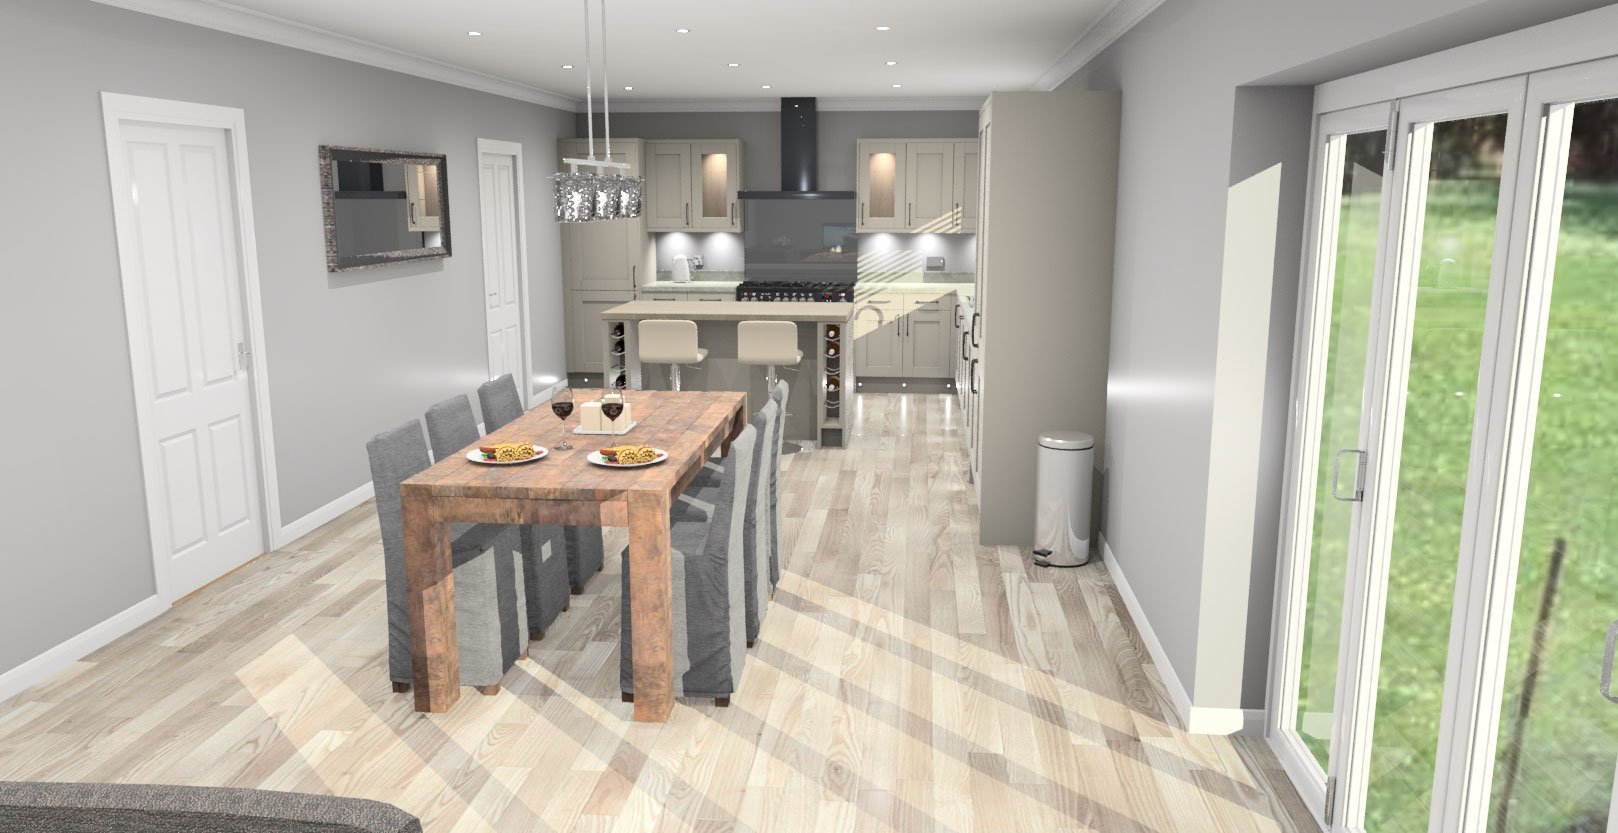 3D digital render of traditional kitchen space